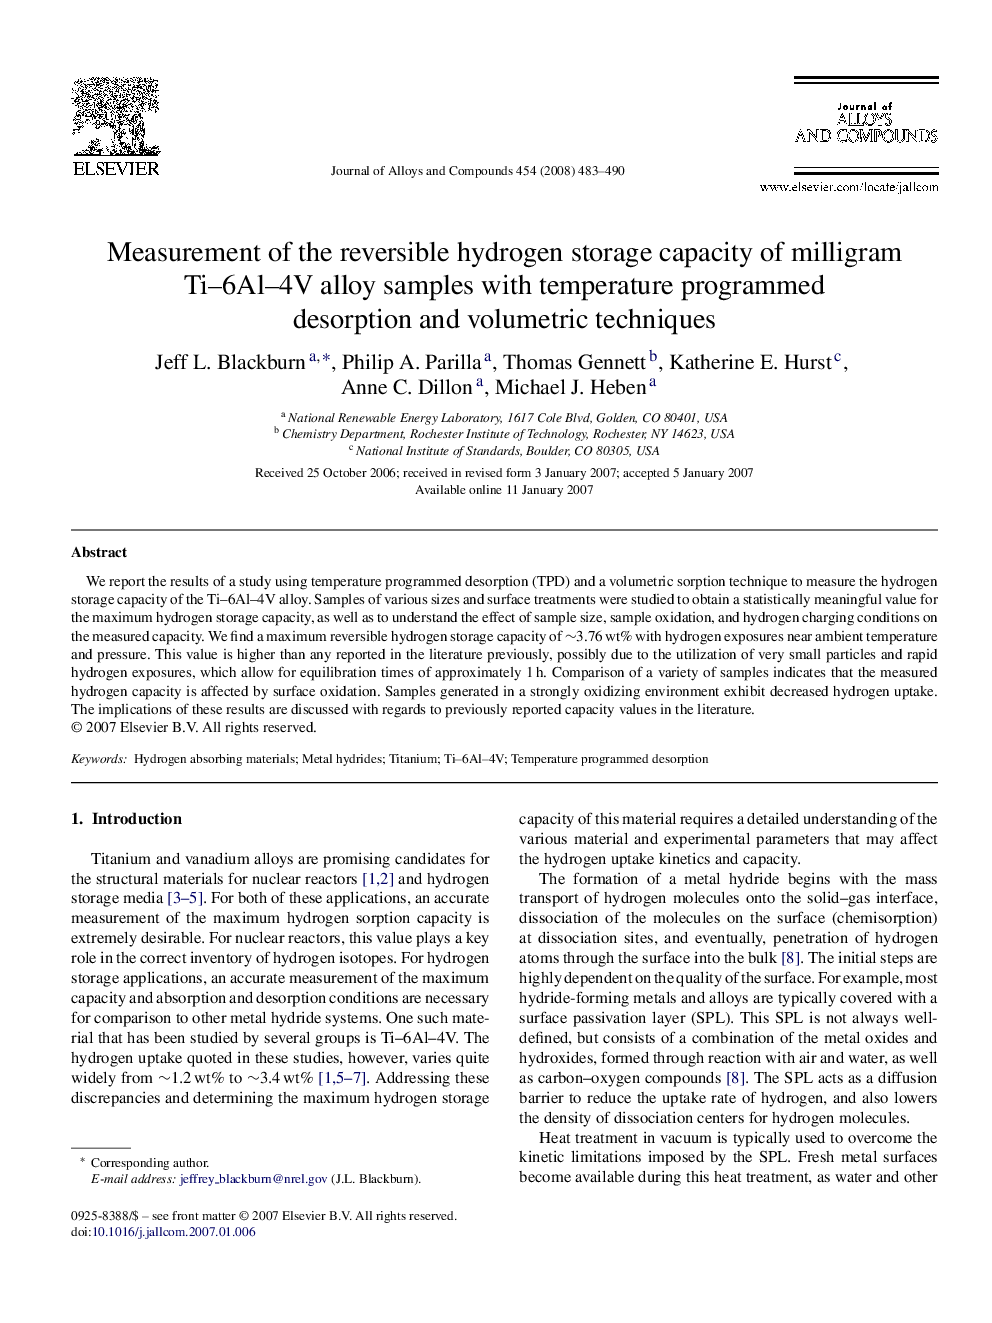 Measurement of the reversible hydrogen storage capacity of milligram Ti–6Al–4V alloy samples with temperature programmed desorption and volumetric techniques